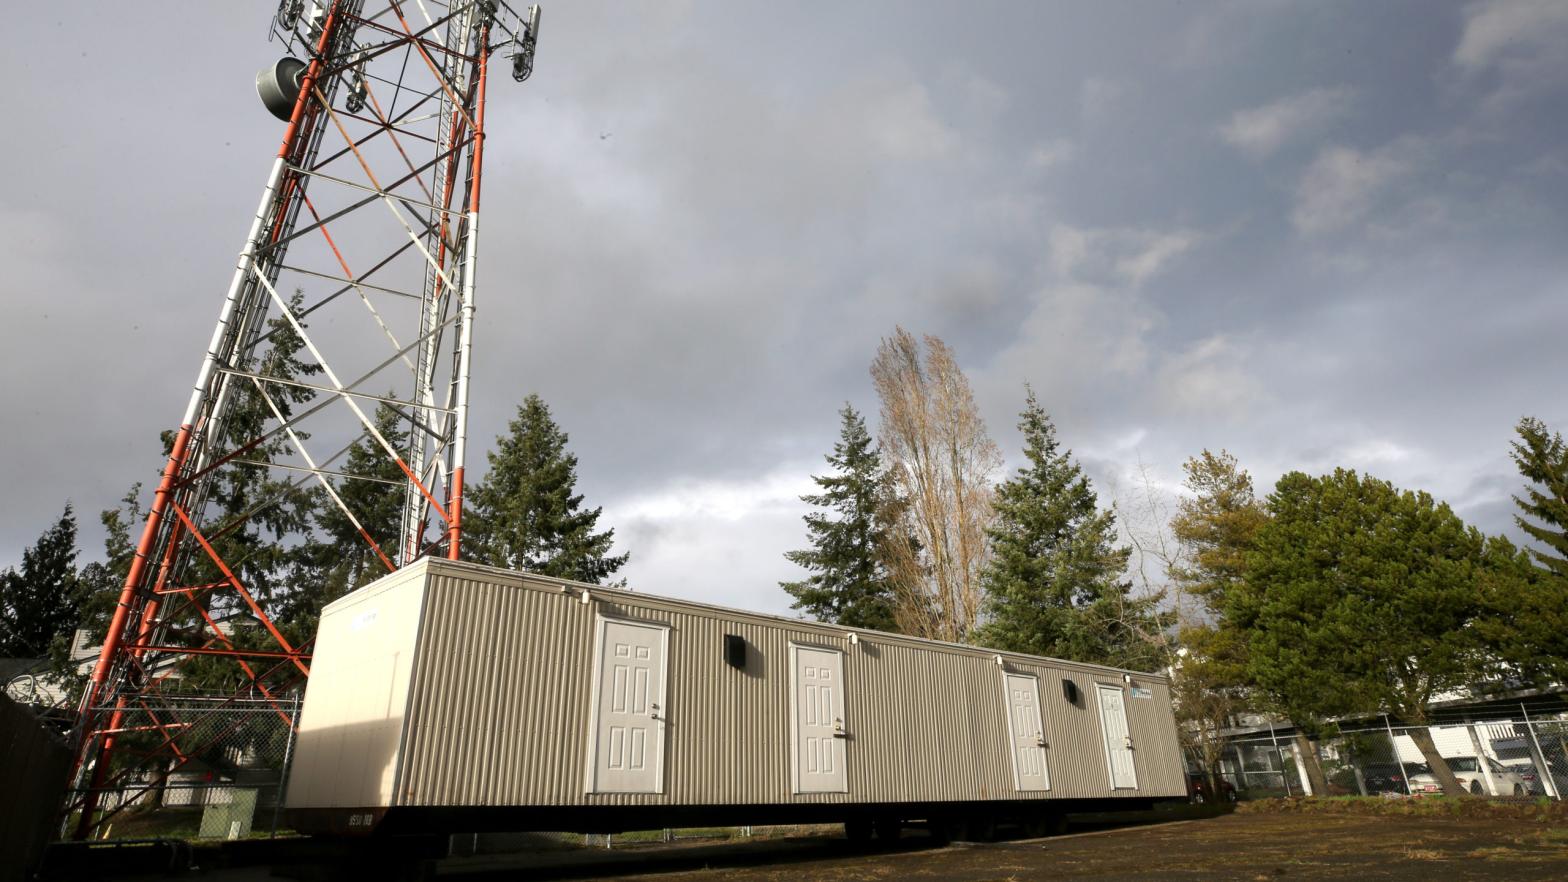 A radio tower behind a modular trailer in King County, Seattle, WA., March 3, 2021. (Photo: Karen Ducey, Getty Images)